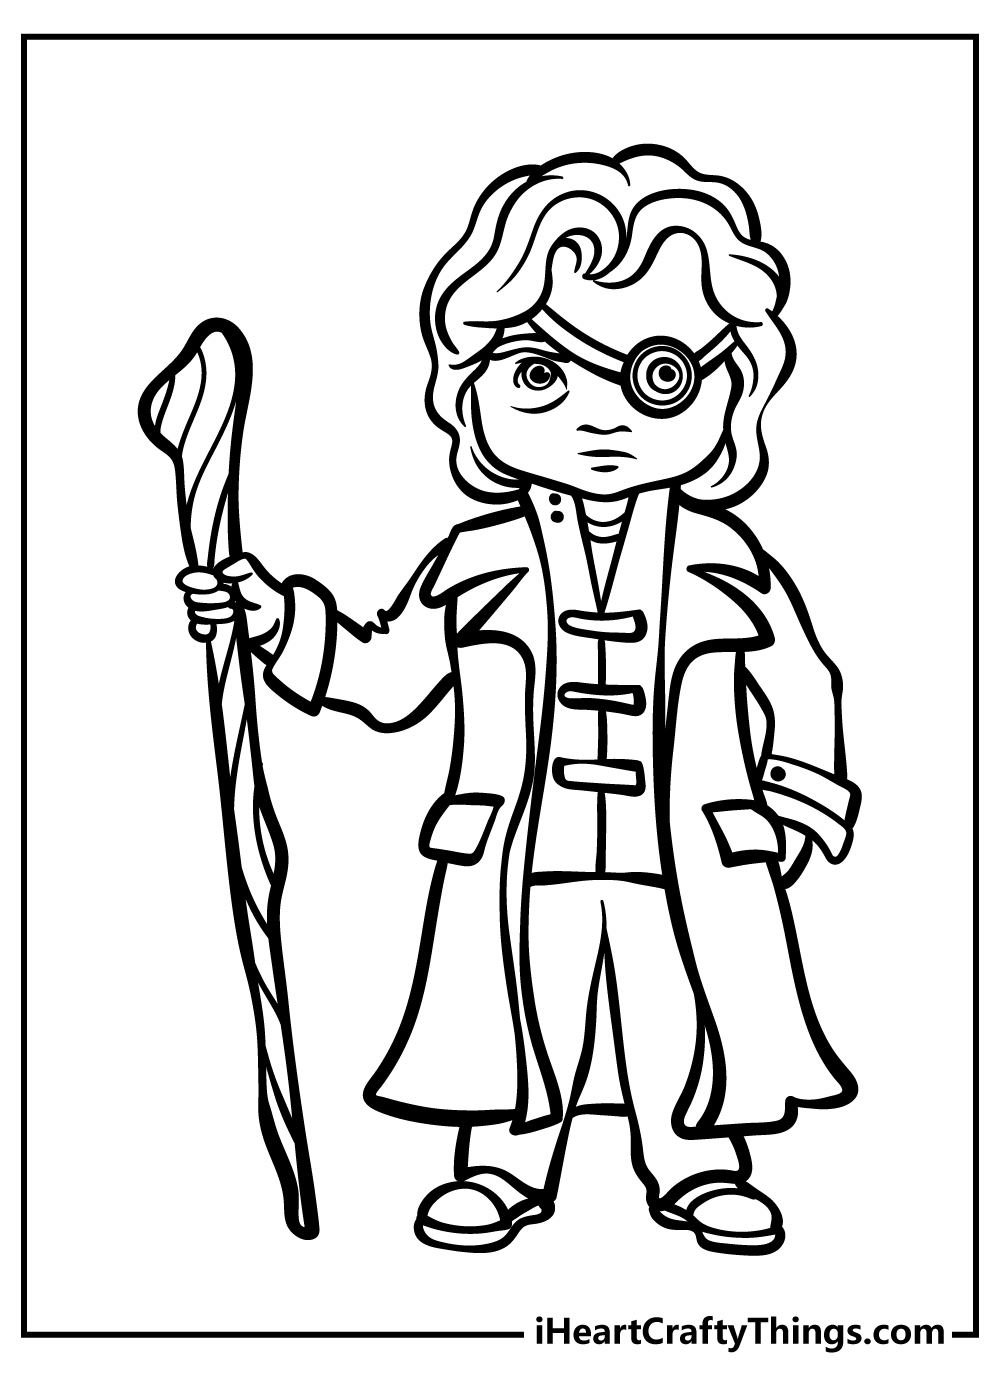 Harry Potter coloring pages free printable